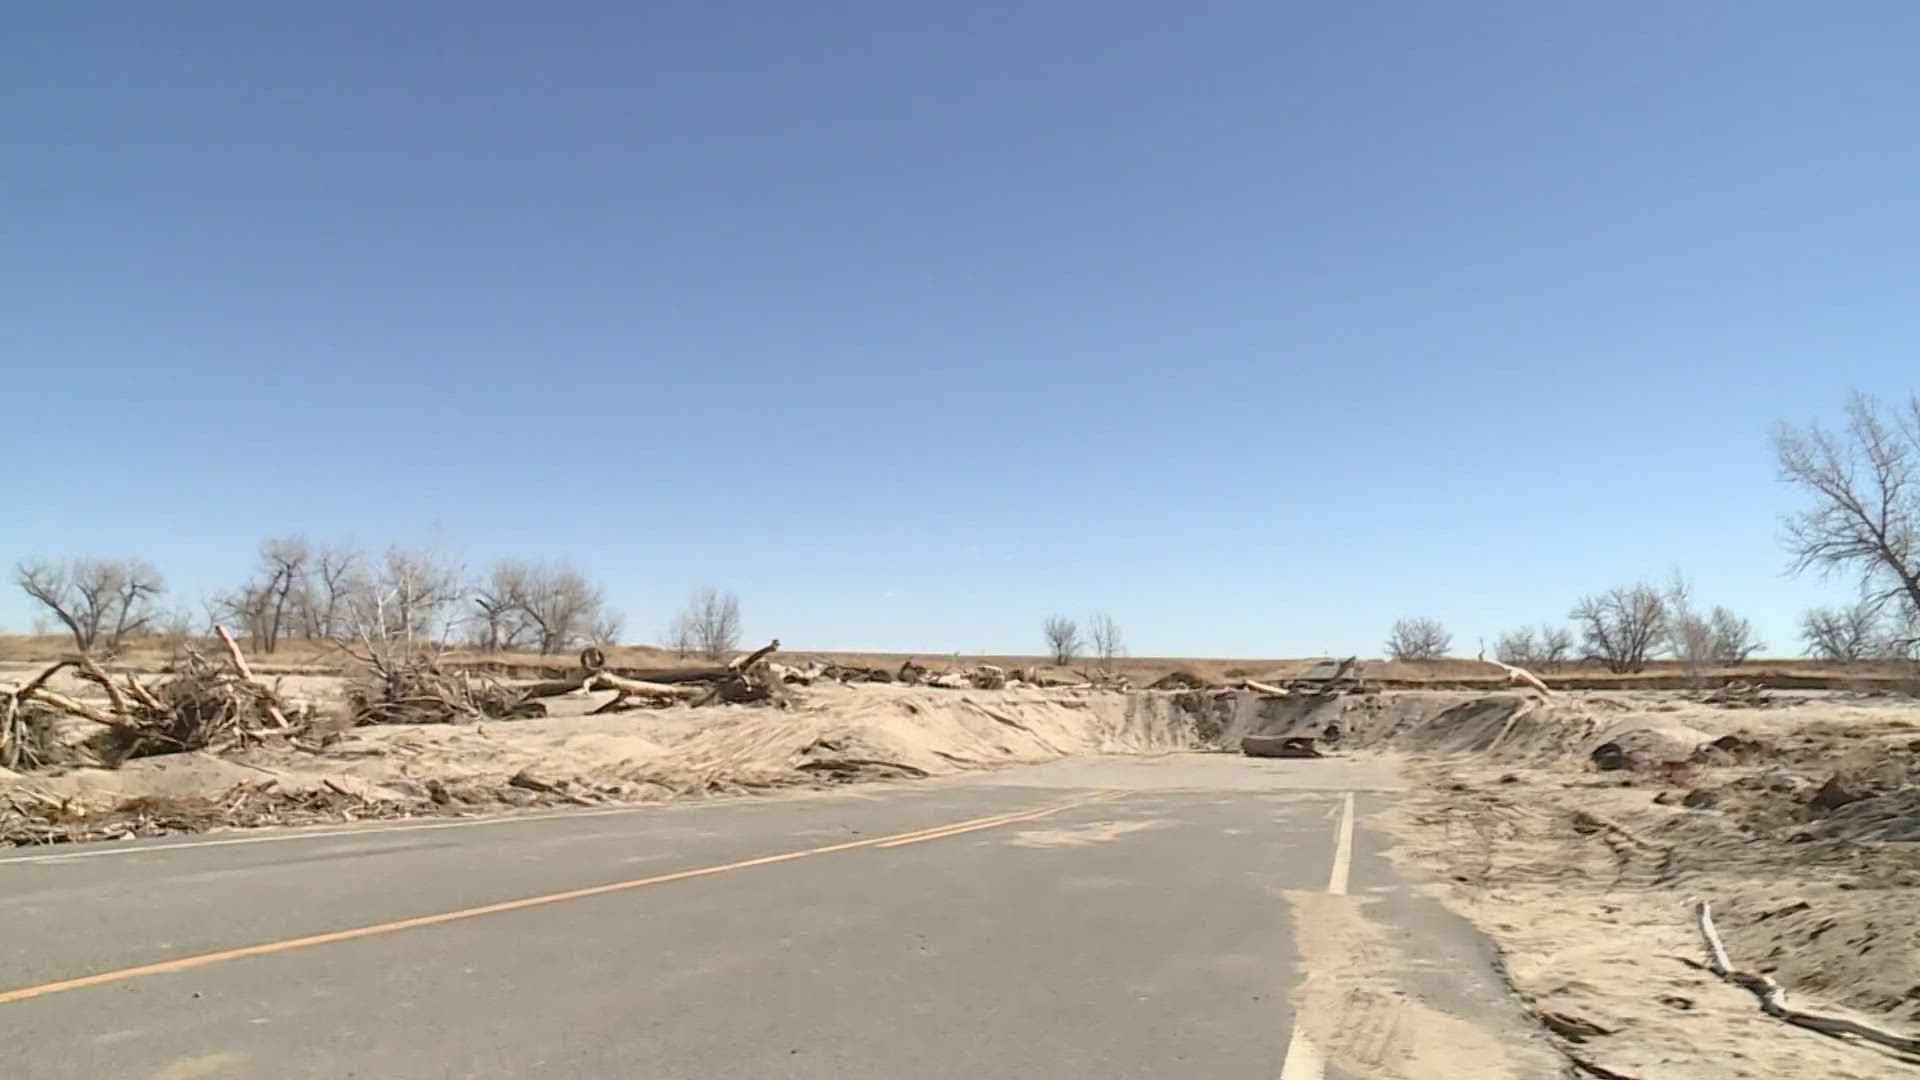 A flash flood destroyed part of Colfax Avenue in Adams County eight months ago, during one of the wettest Junes the Front Range has ever seen.